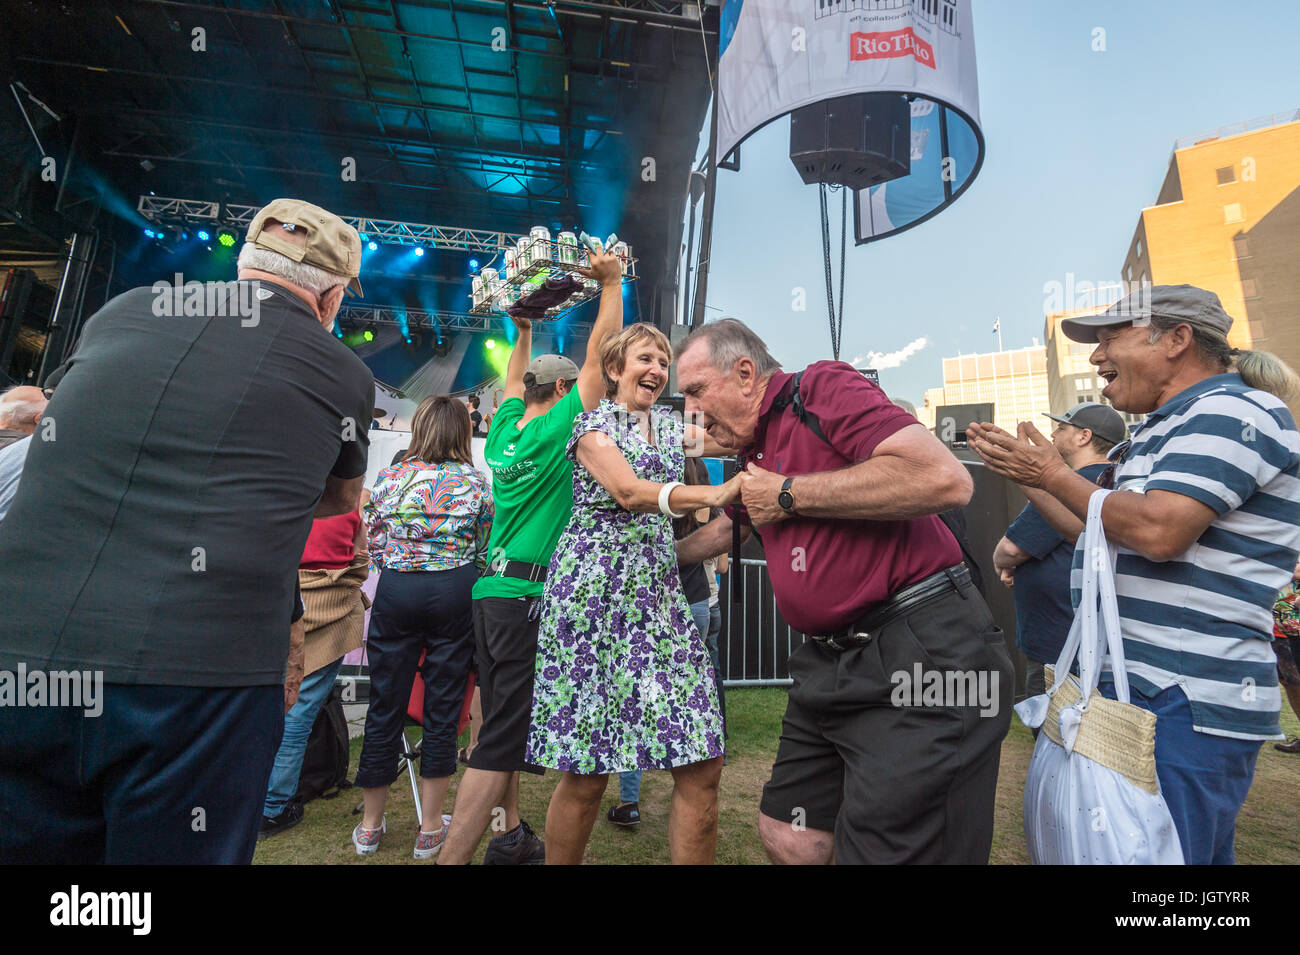 Montreal, Canada - 4 July 2017 - Senior people dancing during Fuel Junkie performance at Montreal Jazz Festival Stock Photo